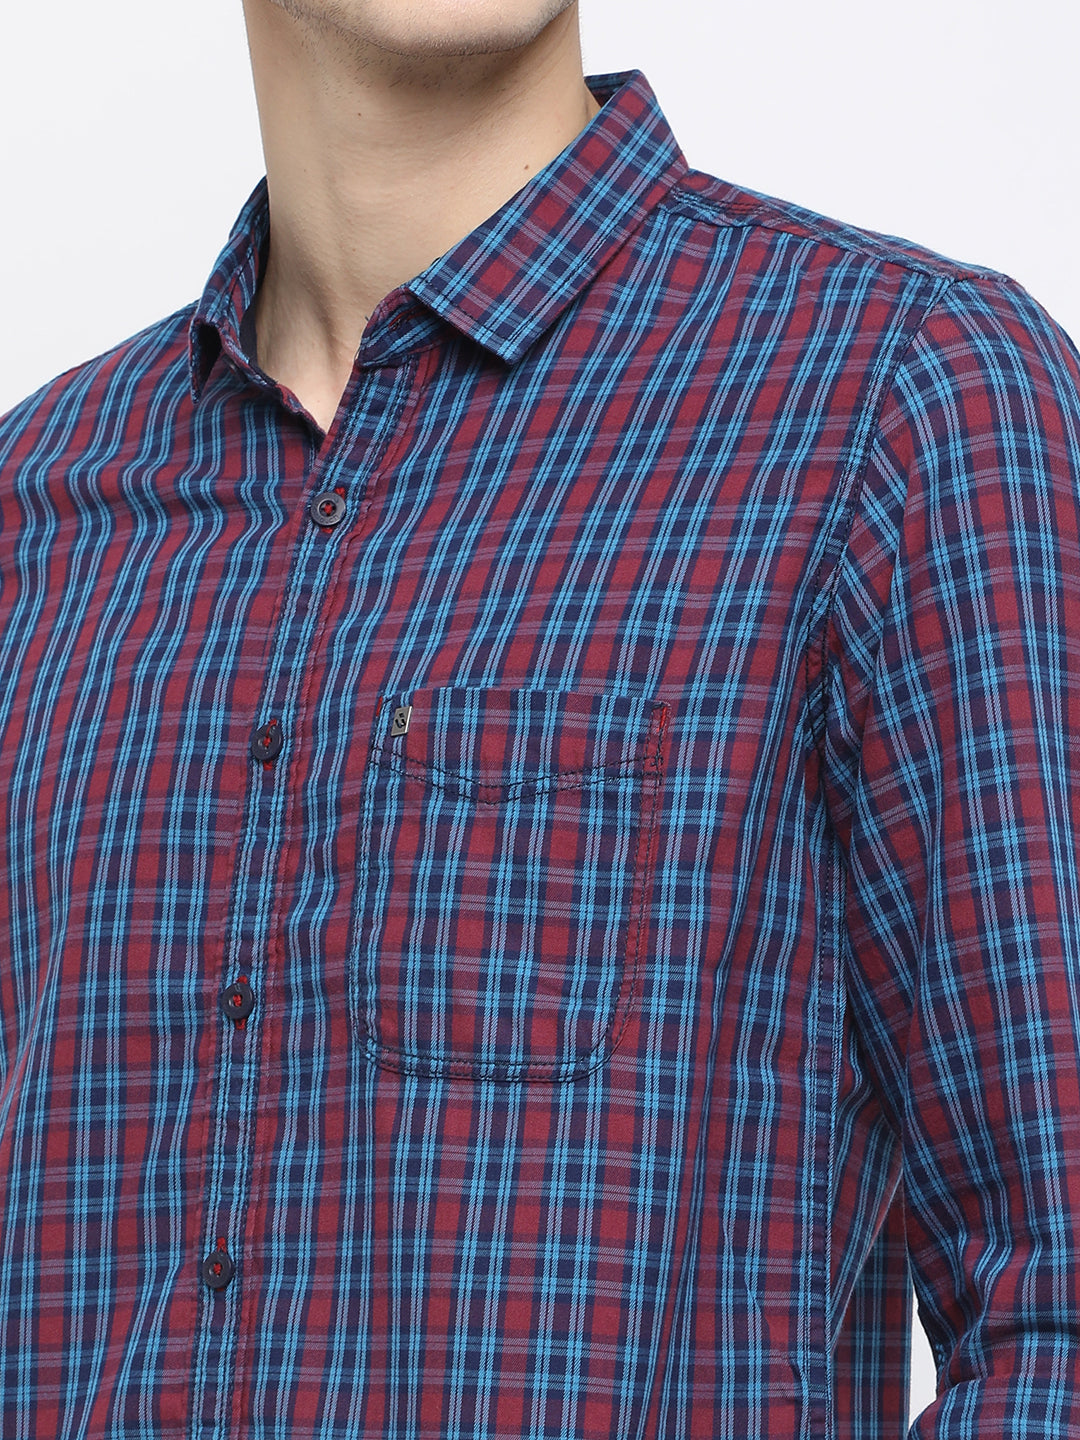 Pink and blue checkered casual shirt - urban clothing co.